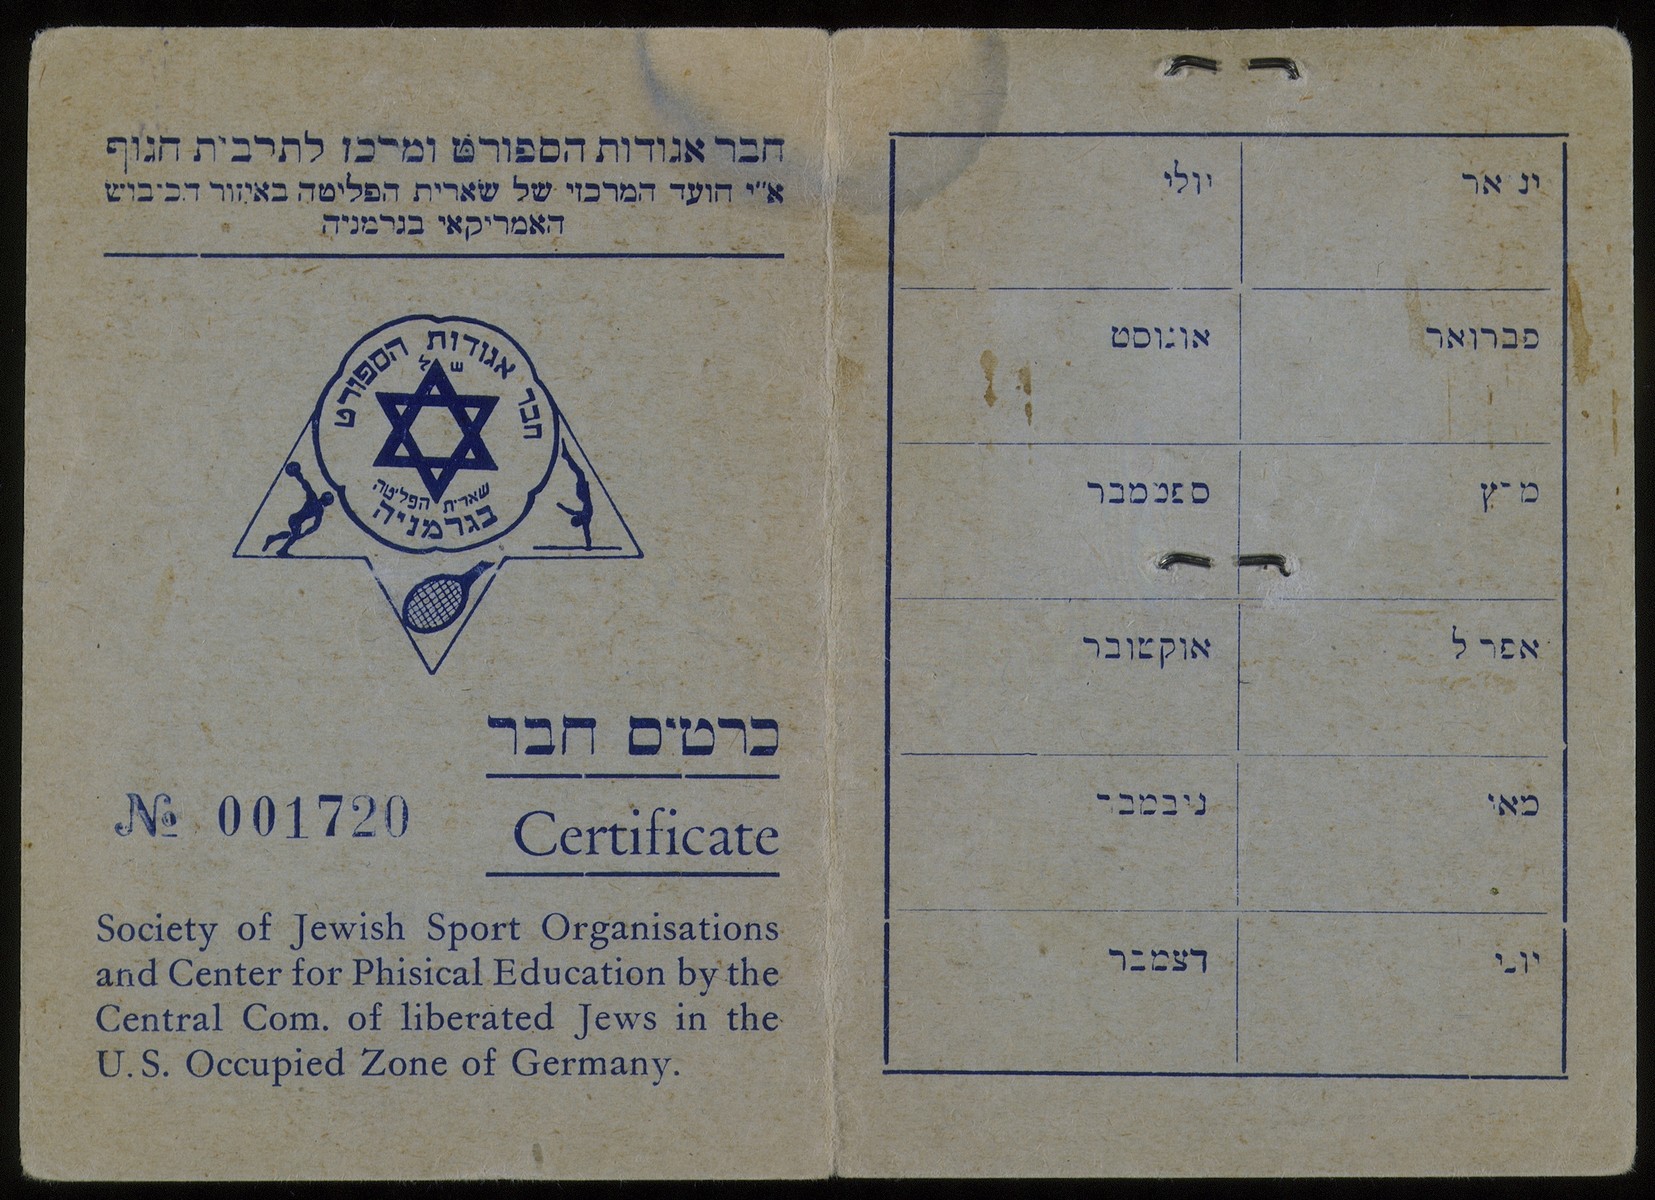 Membership card for the Society of Jewish Sport Organisations and Center for Physical Education issued to Jewish DP Abram Hirshenhorn

The society of Jewish Sport Organisations was sponsored by the Central Committee of Liberated Jews in the U.S. Zone of Germany.